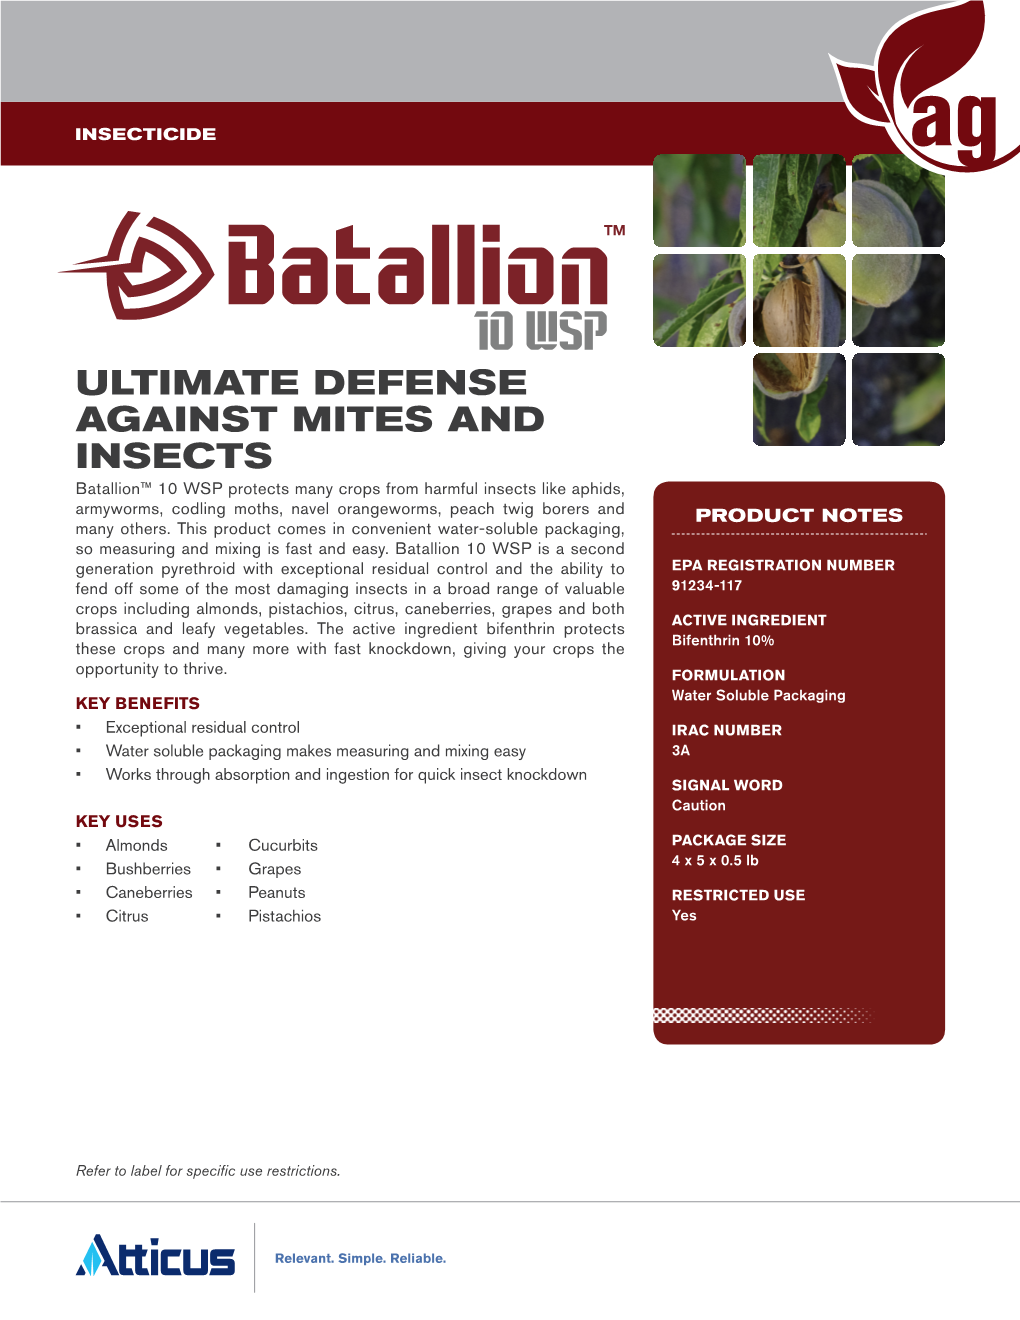 Ultimate Defense Against Mites and Insects